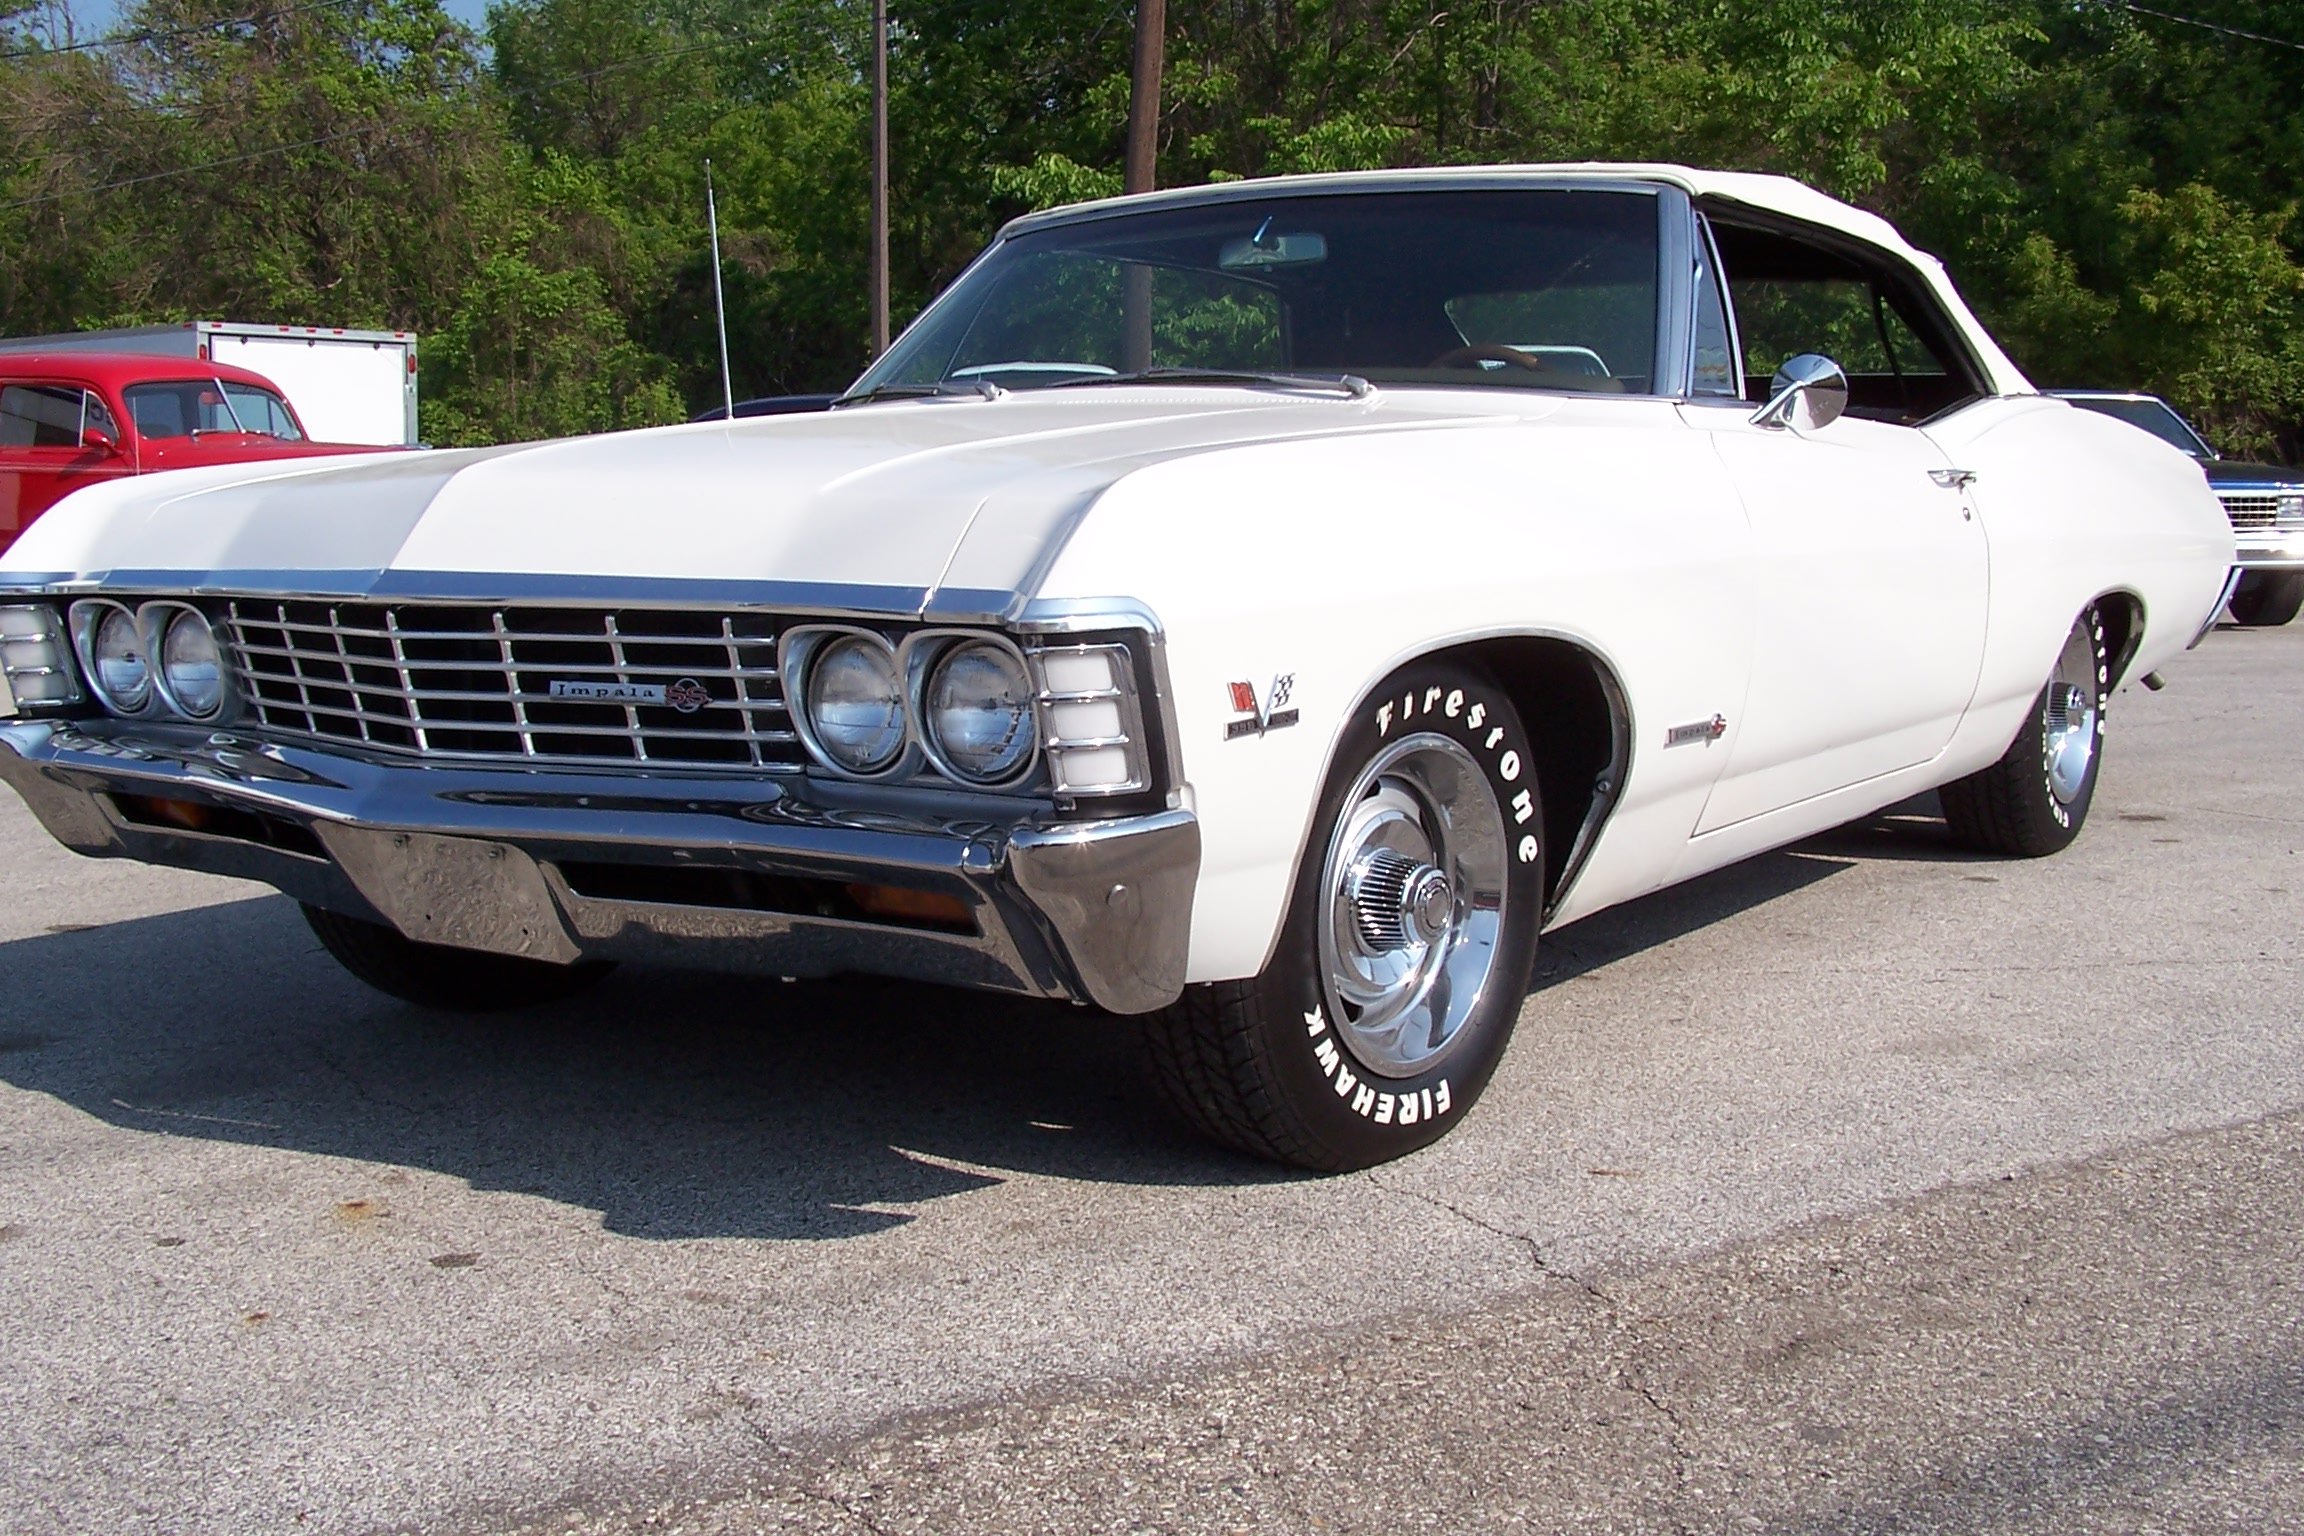 1967, Chevrolet, Impala, Ss, Convertible, Muscle, Classic, S s Wallpaper